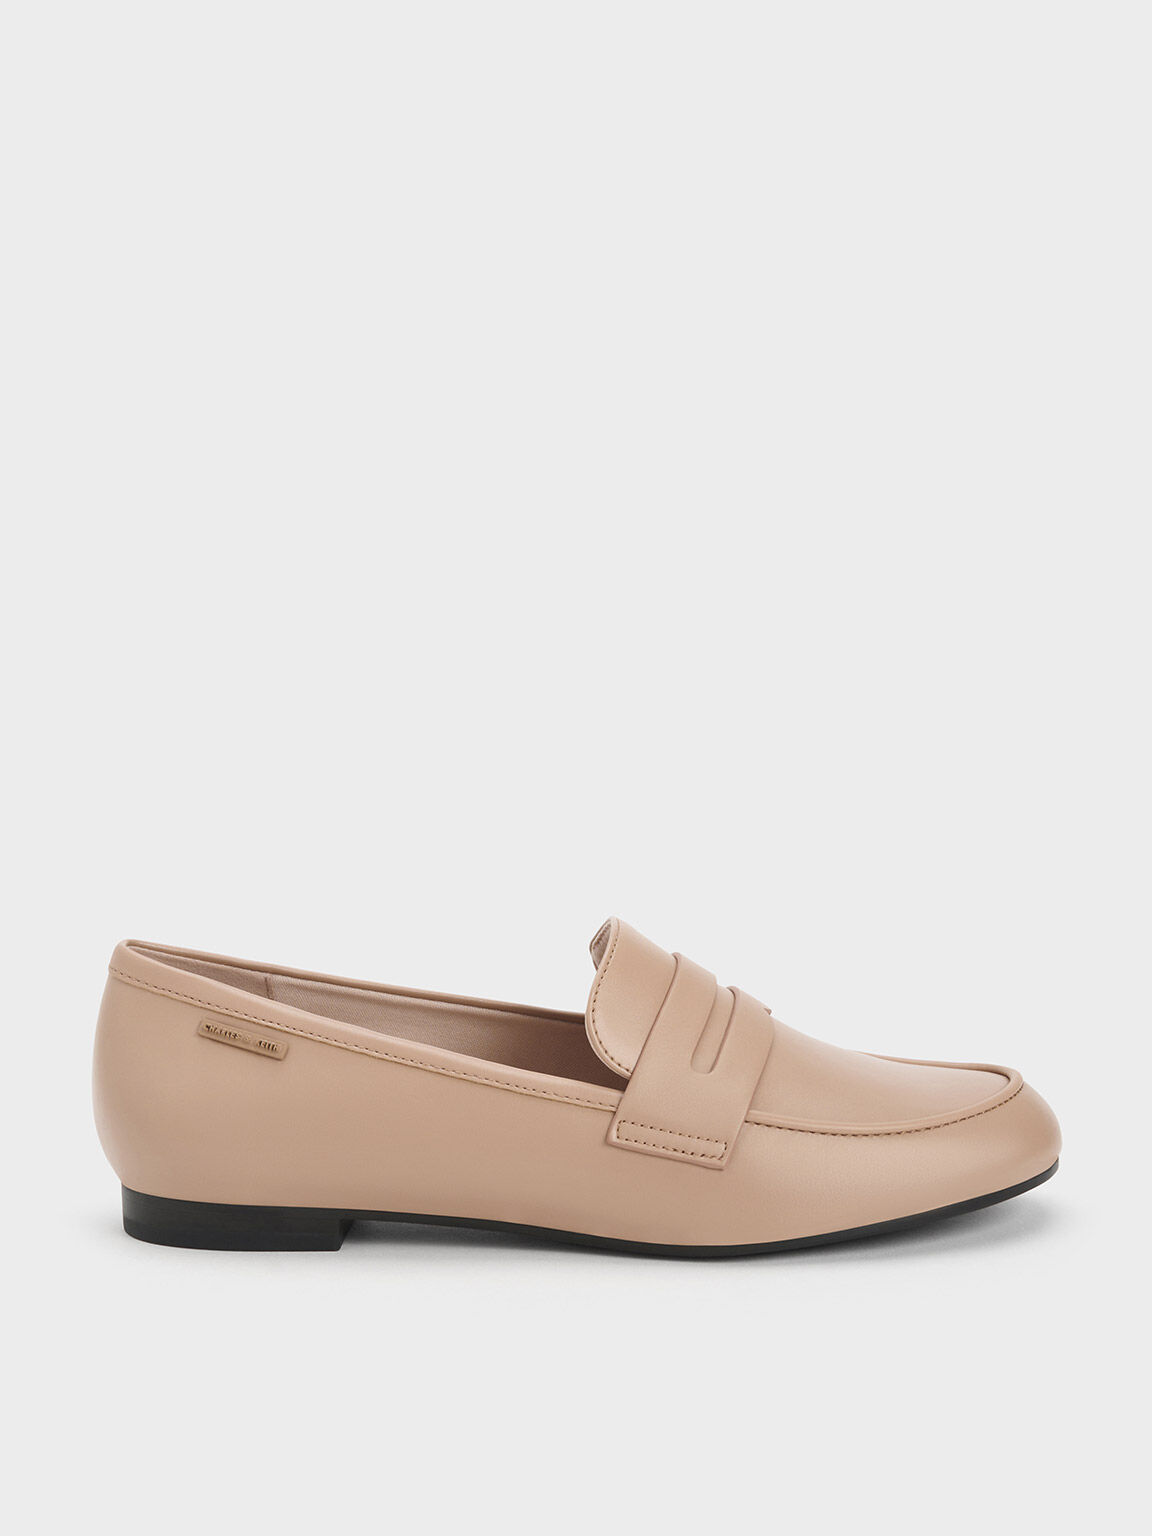 Cut-Out Almond Toe Penny Loafers, Nude, hi-res